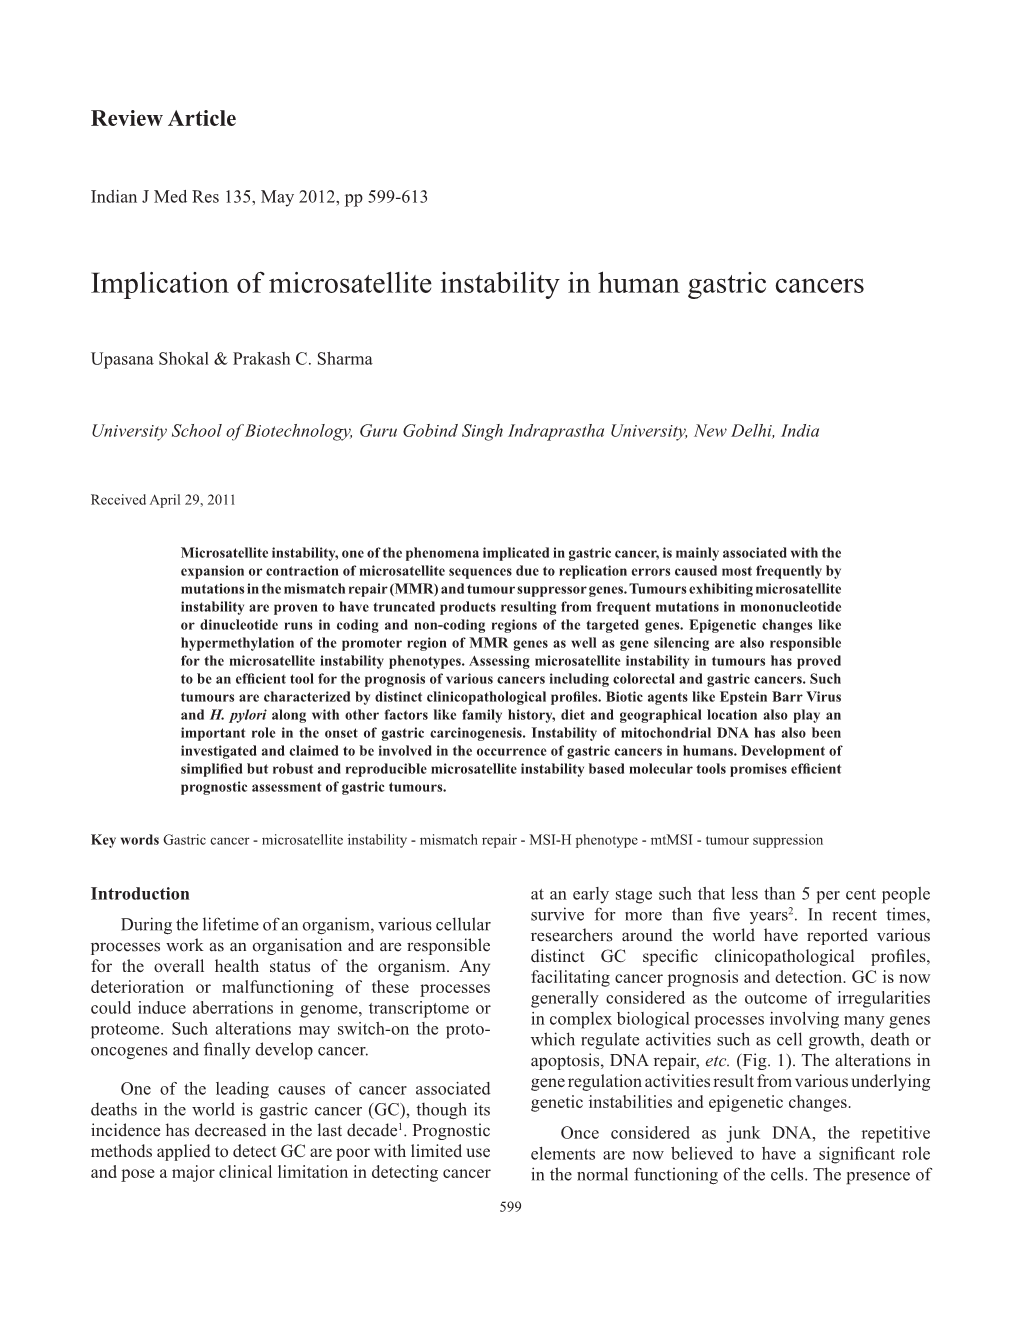 Implication of Microsatellite Instability in Human Gastric Cancers